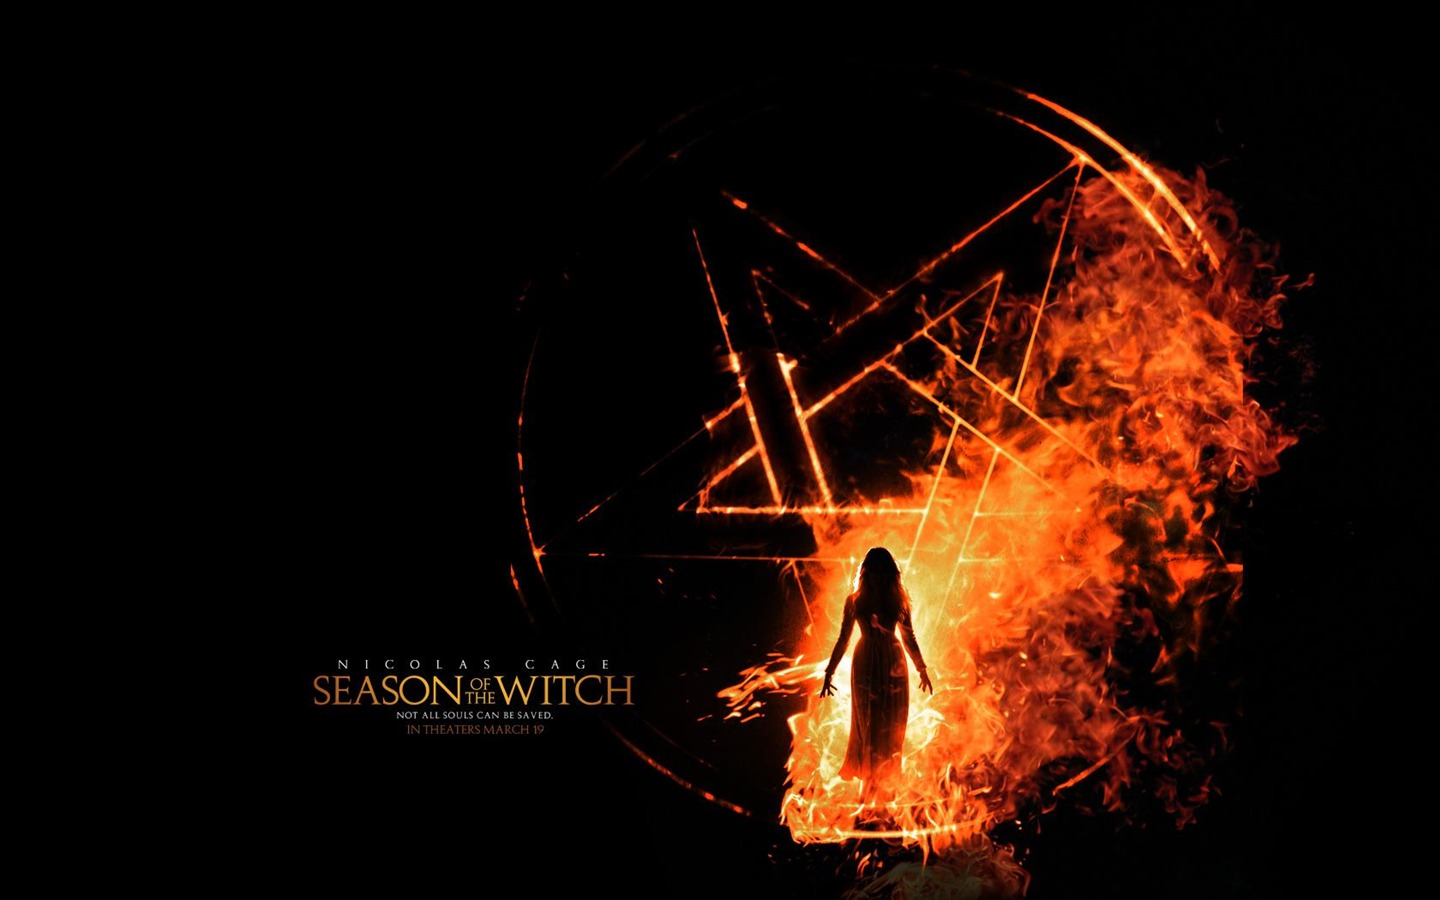 Season of the Witch wallpapers #37 - 1440x900